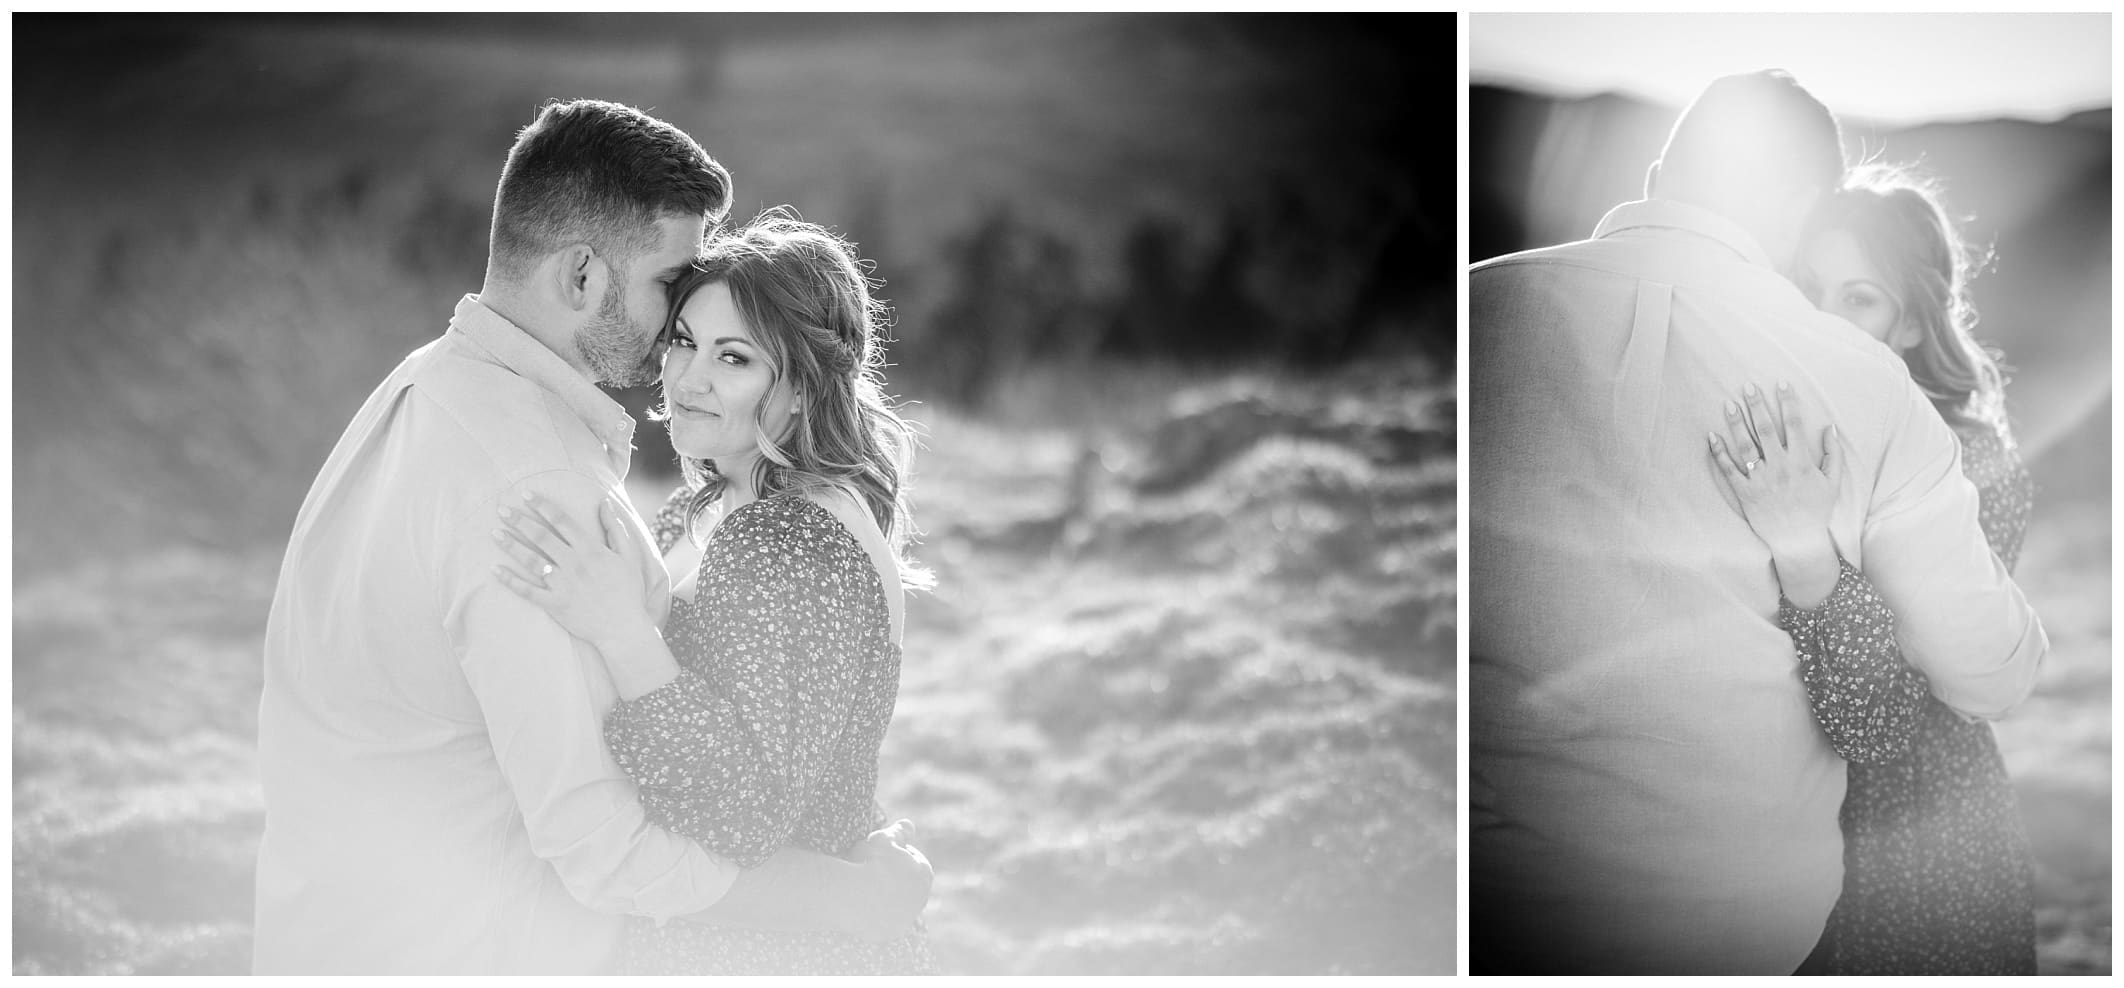 Black and white photos with lens flare at mountain view engagement session at the golden hour in Asheville, NC